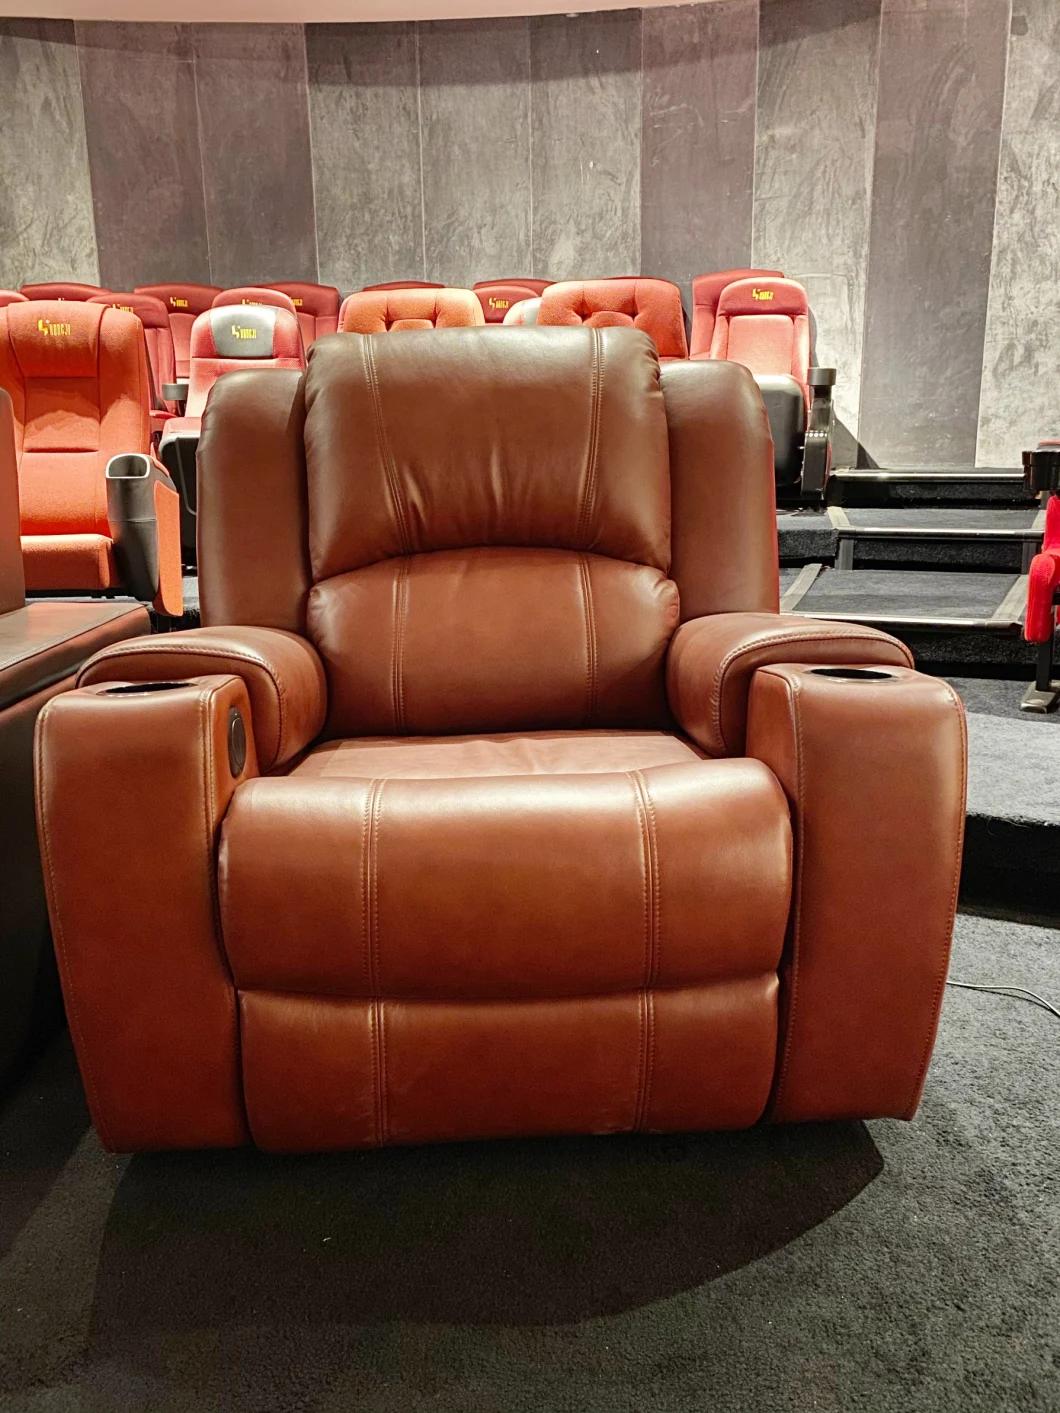 VIP Leather Movie Home Cinema Theater Recliner Chair